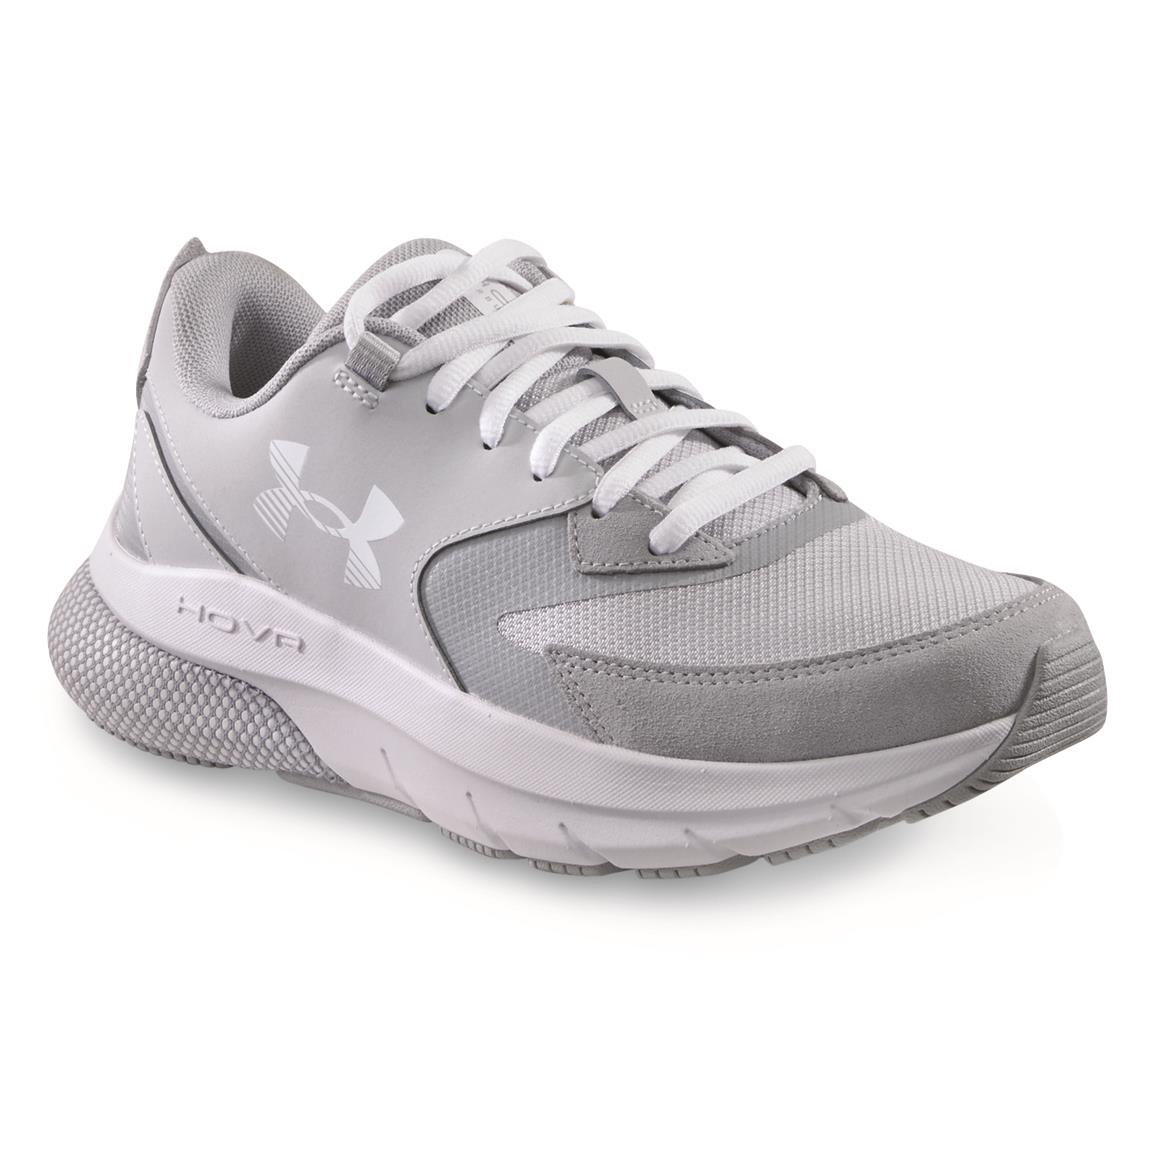 Under Armour Women's HOVR Turbulence LTD Running Shoes, Halo Gray/mod Gray/white